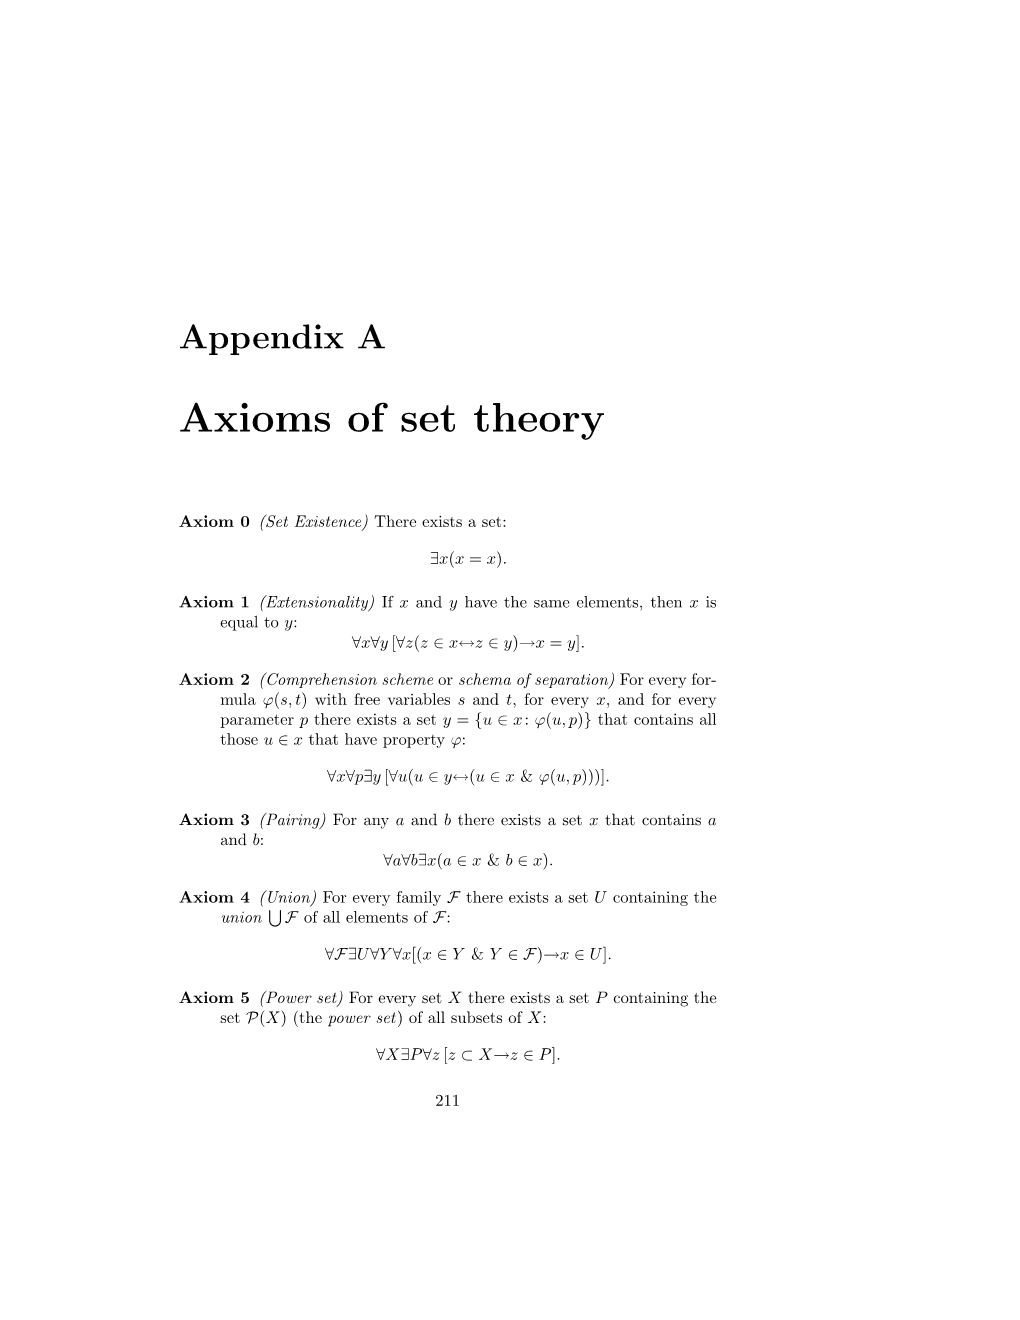 A List of ZFC Axioms of Set Theory